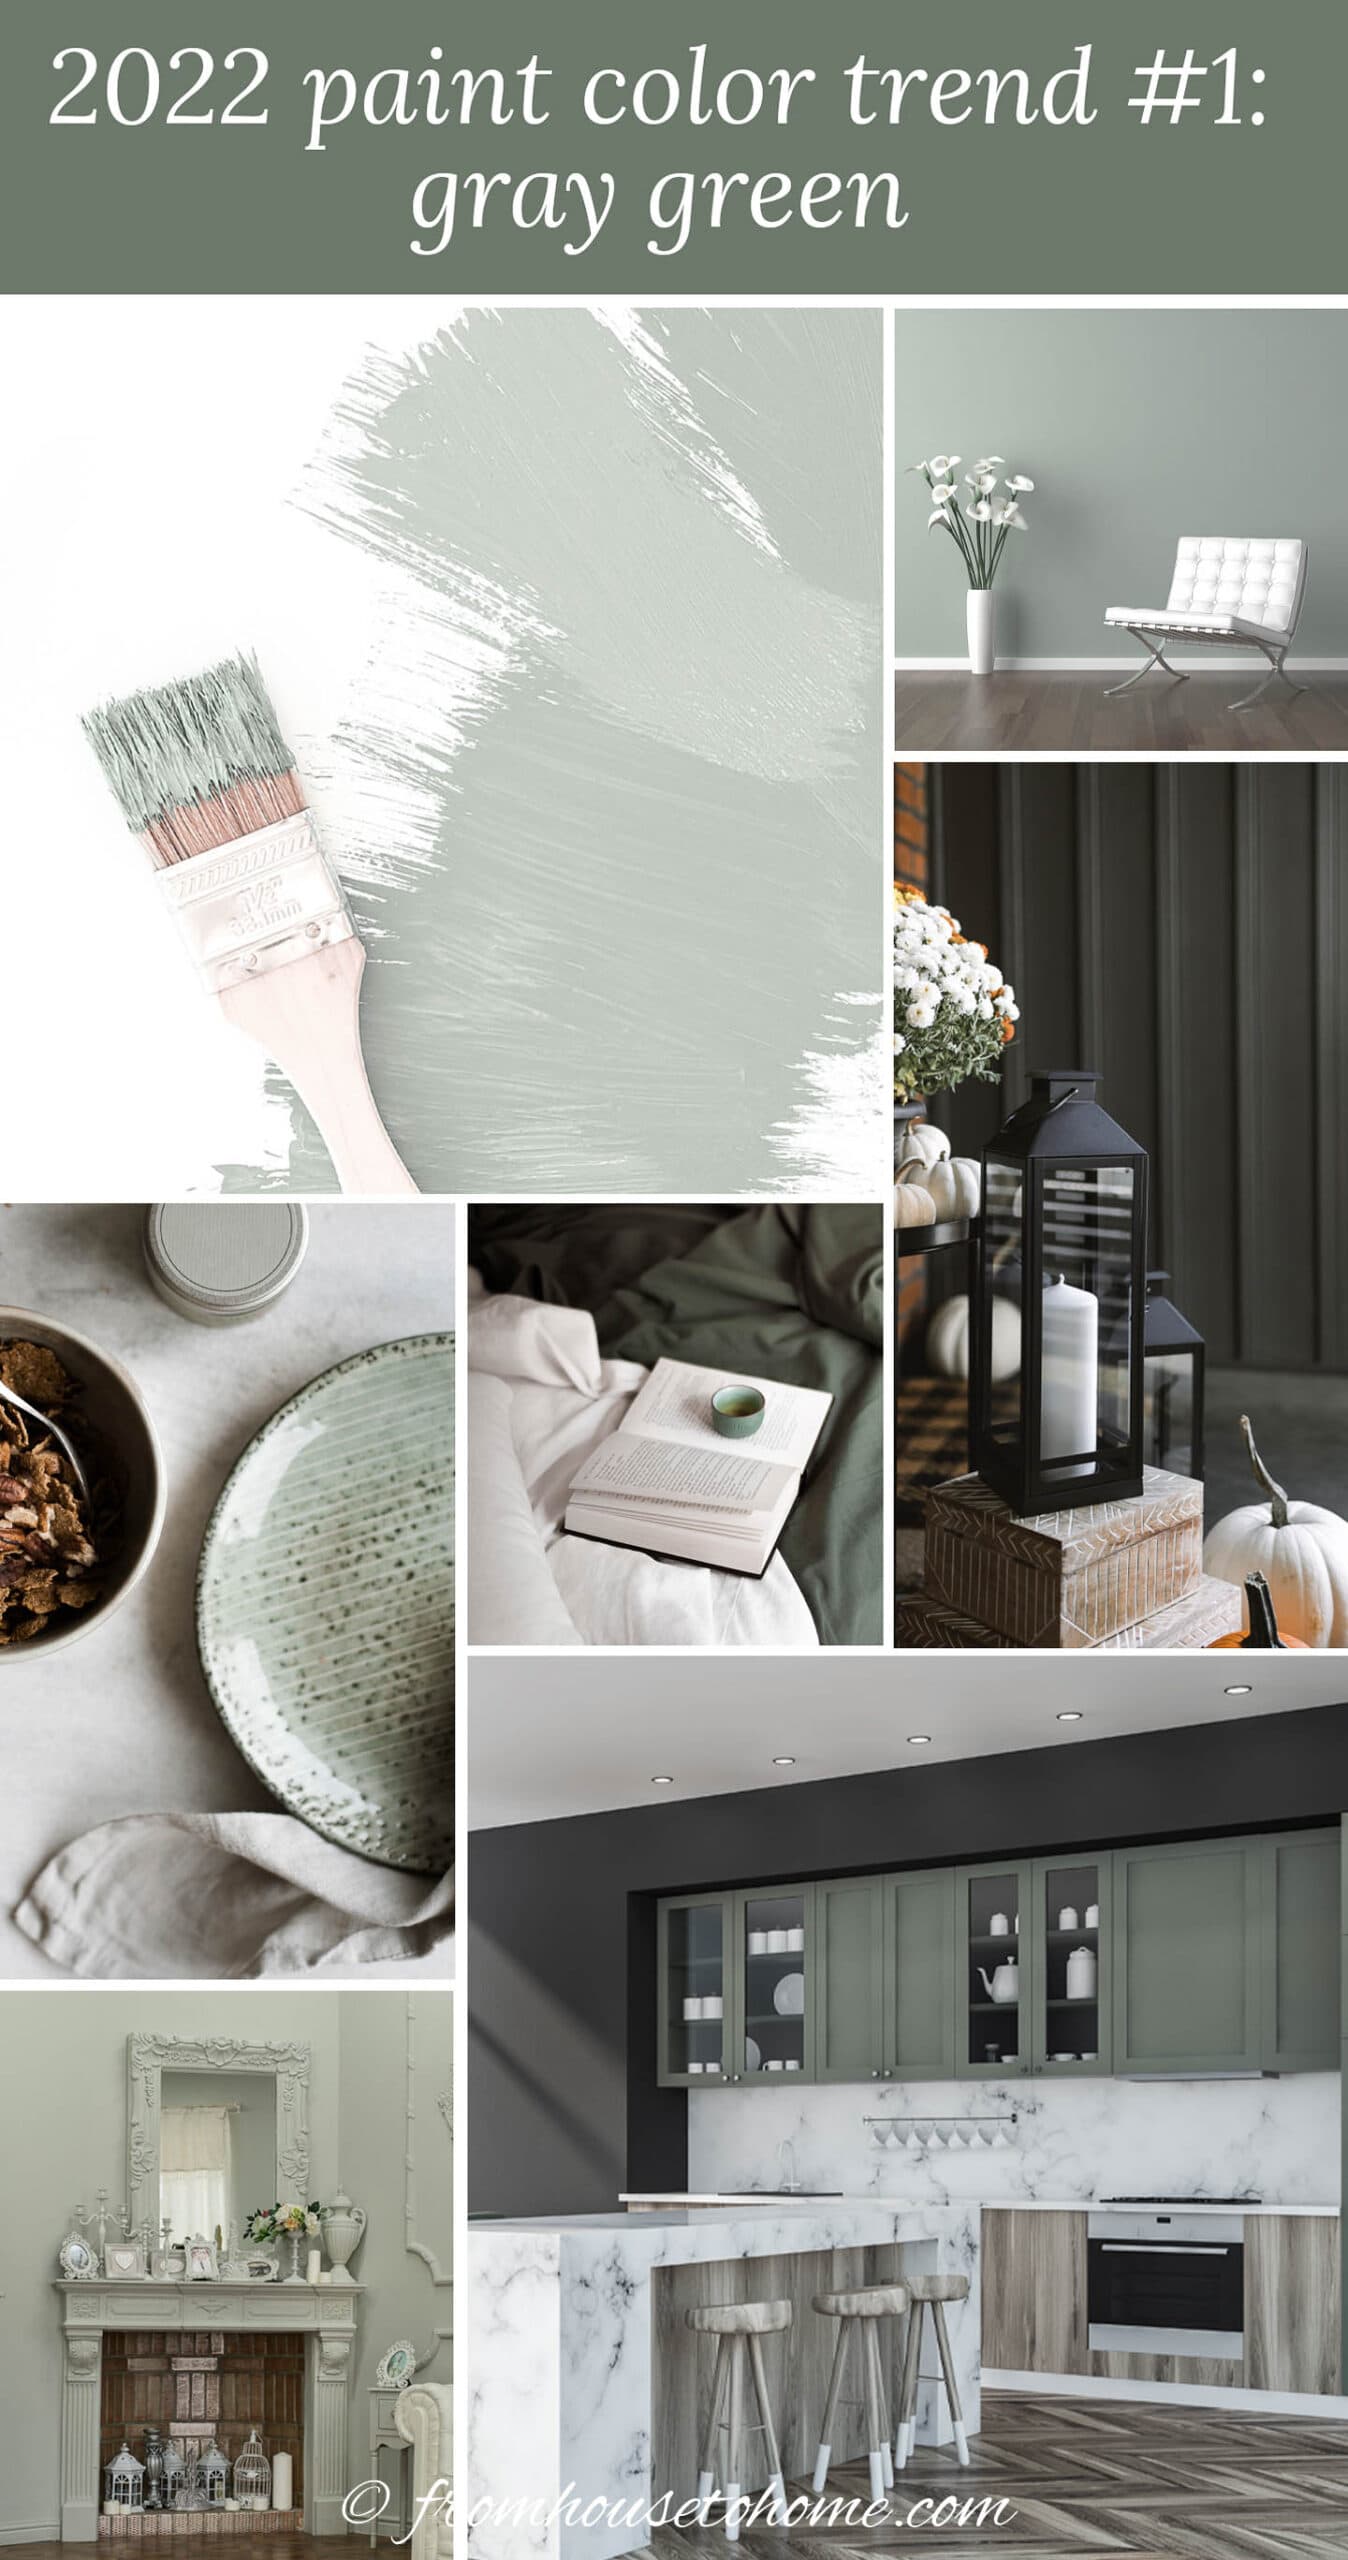 gray green paint images including paint brush, white chair in front of a gray green wall, Lantern and candles in front of a dark green wall, gray green plate, dark gray green kitchen cabinets with white marble countertops and a light gray green fireplace mantel